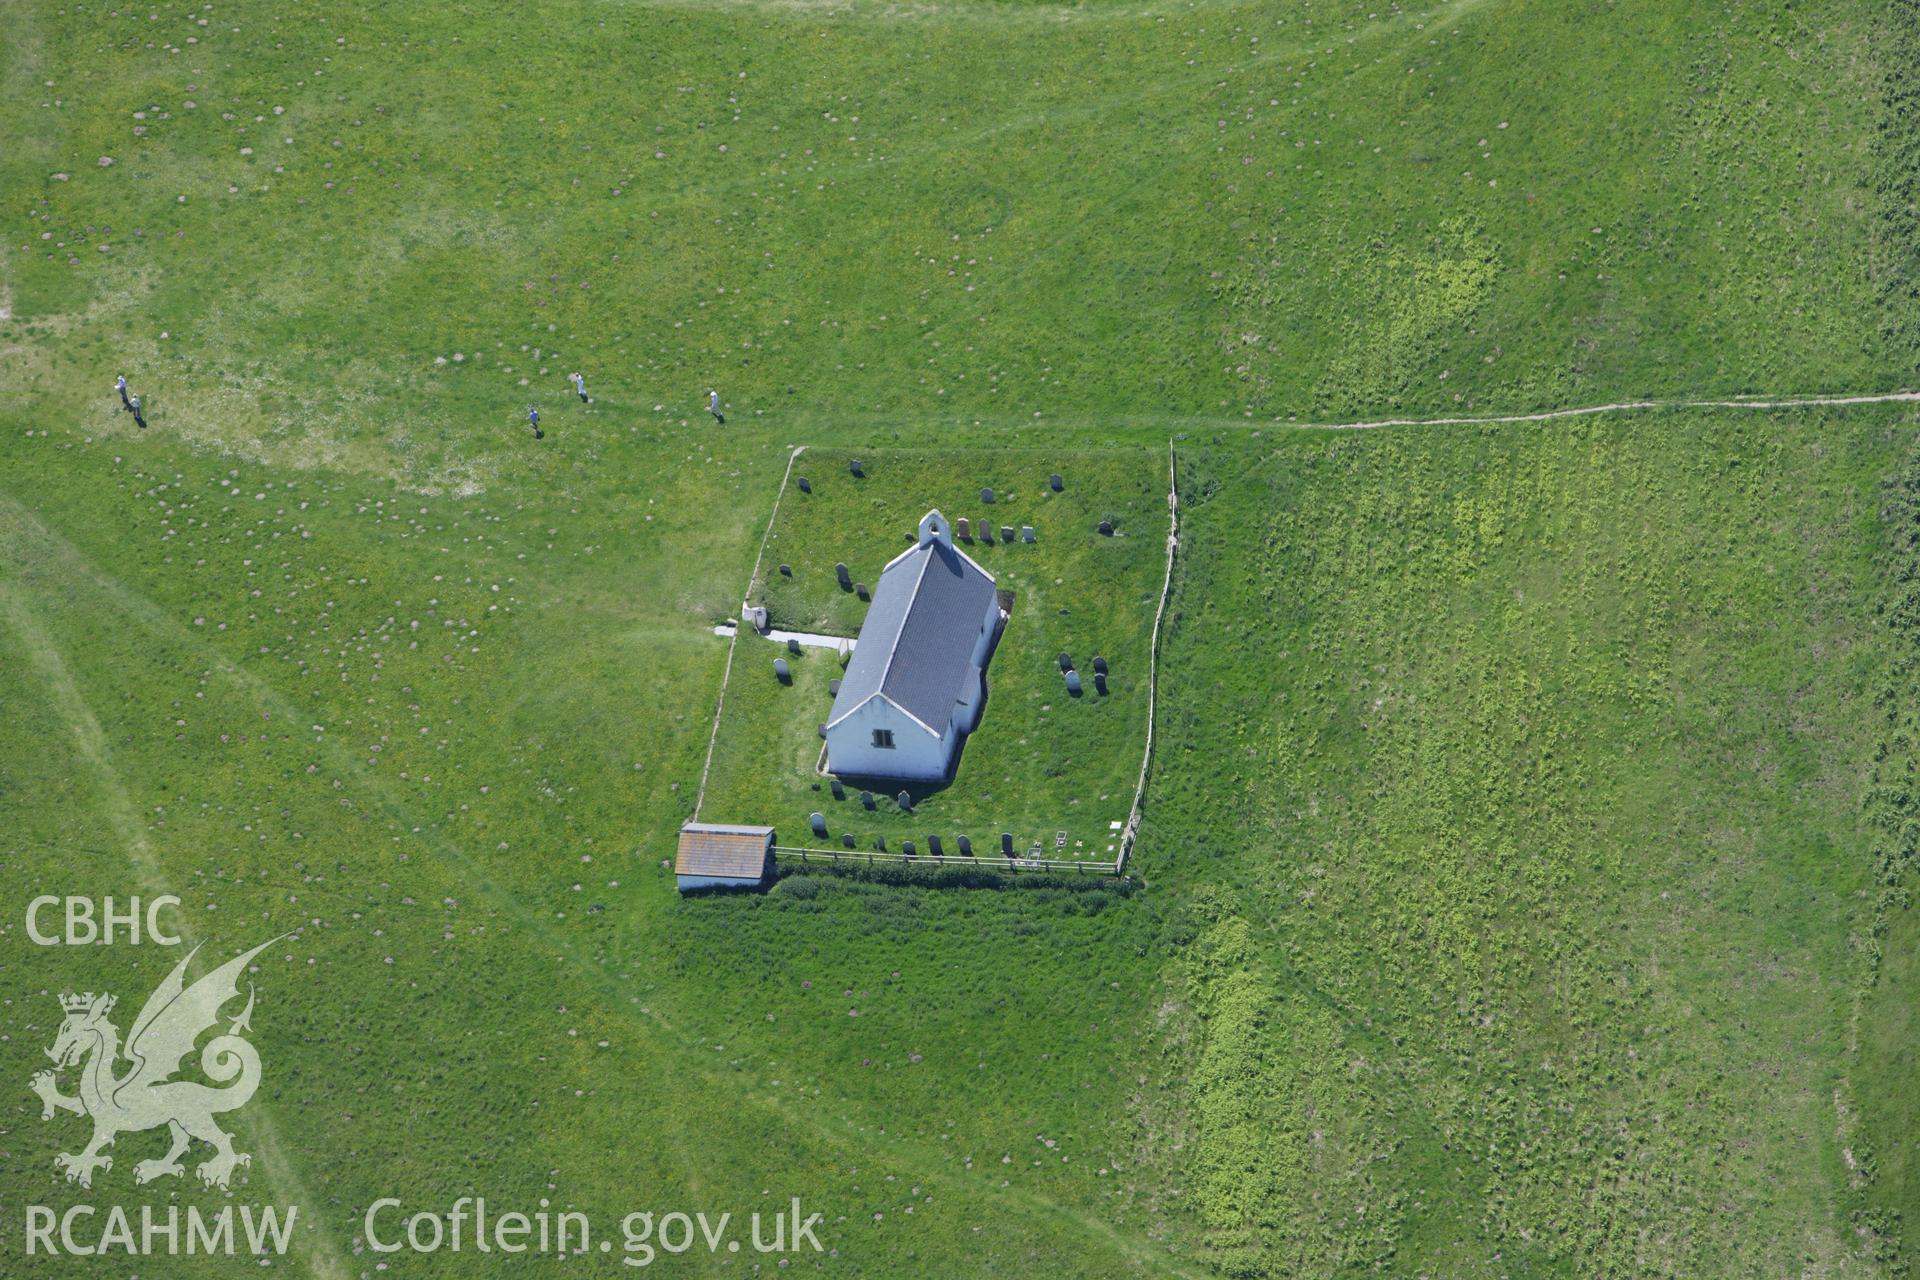 RCAHMW colour oblique aerial photograph of Holy Cross Church, Mwnt Verwig. Taken on 01 June 2009 by Toby Driver